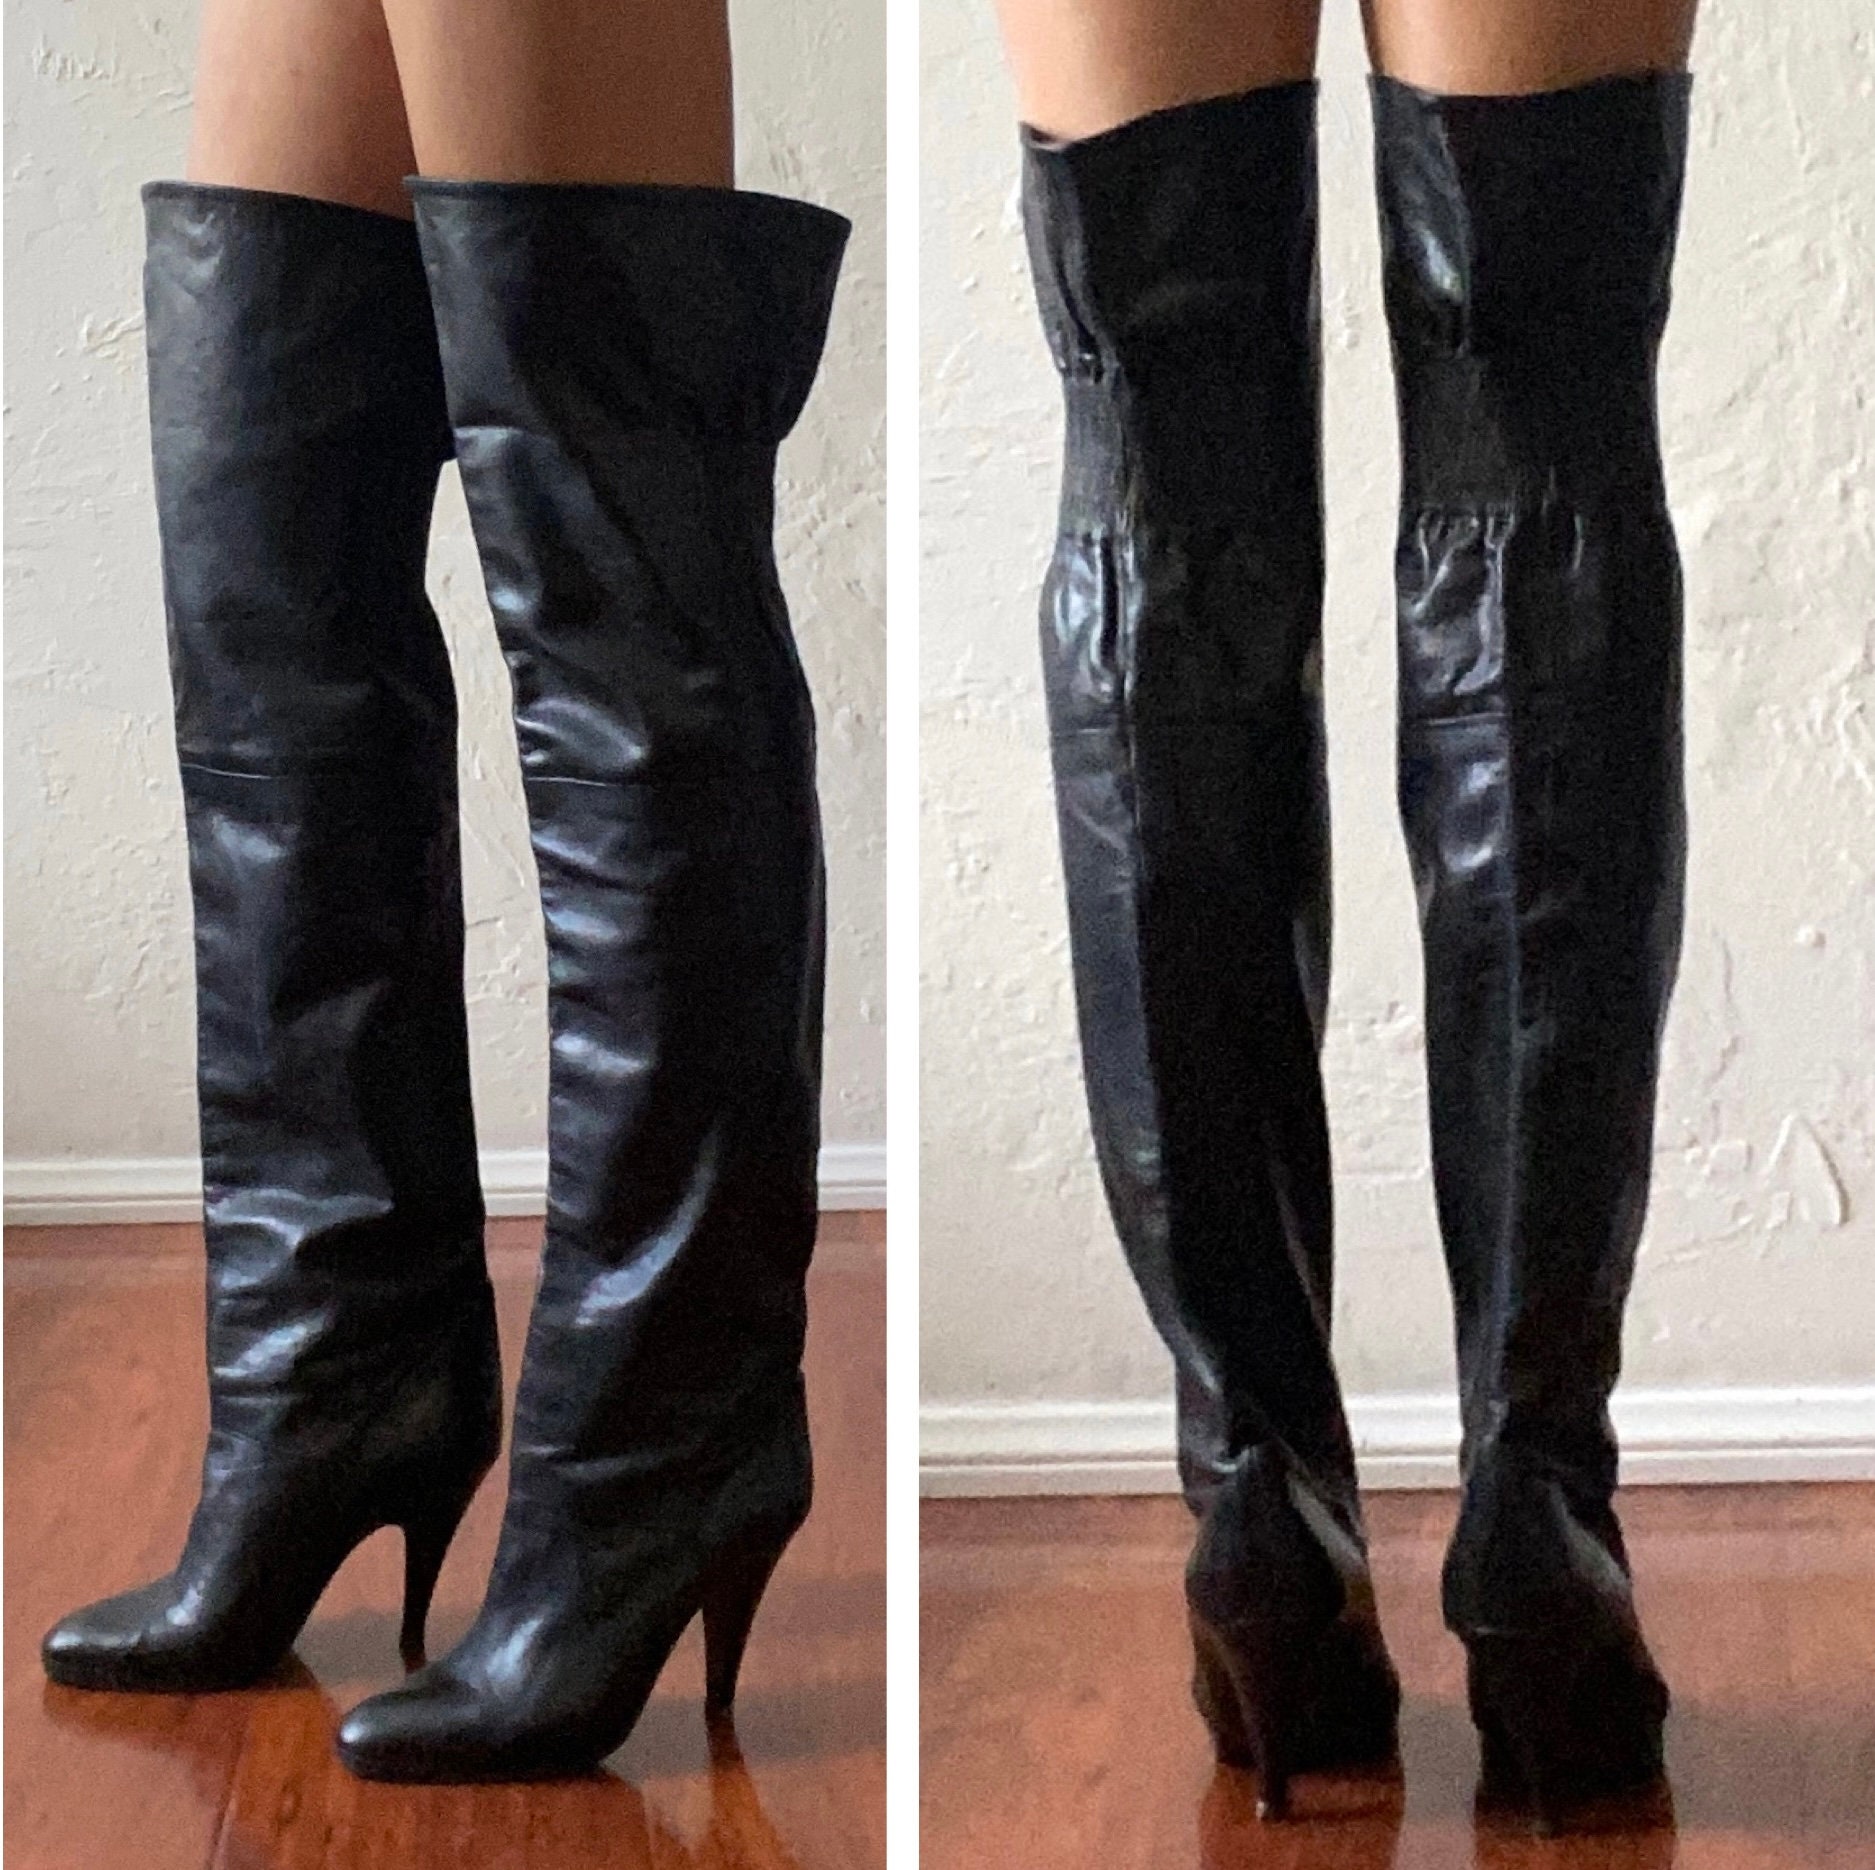 Chanel Knee Boots - 39 For Sale on 1stDibs  chanel knee high boots, chanel  2015 fold over knee high boots, chanel black knee high boots